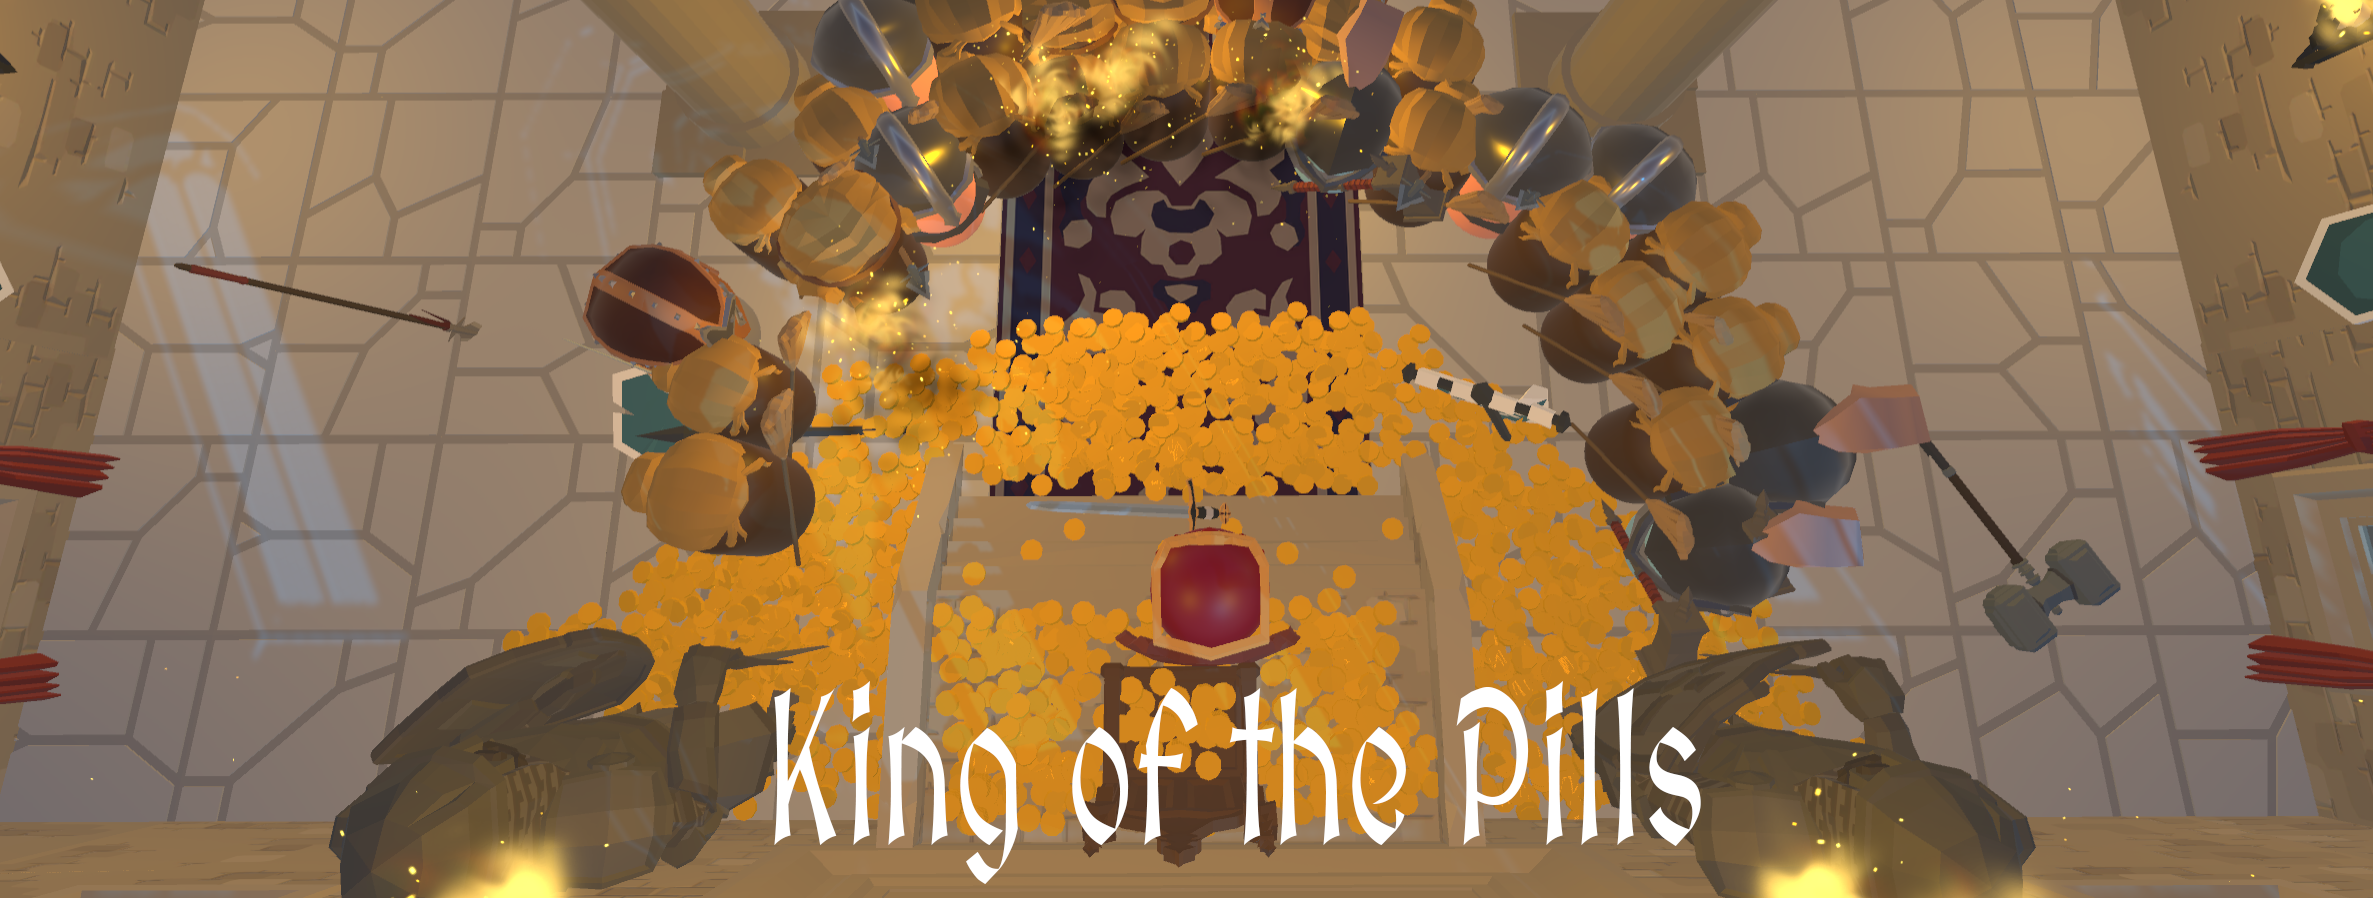 King of the Pills